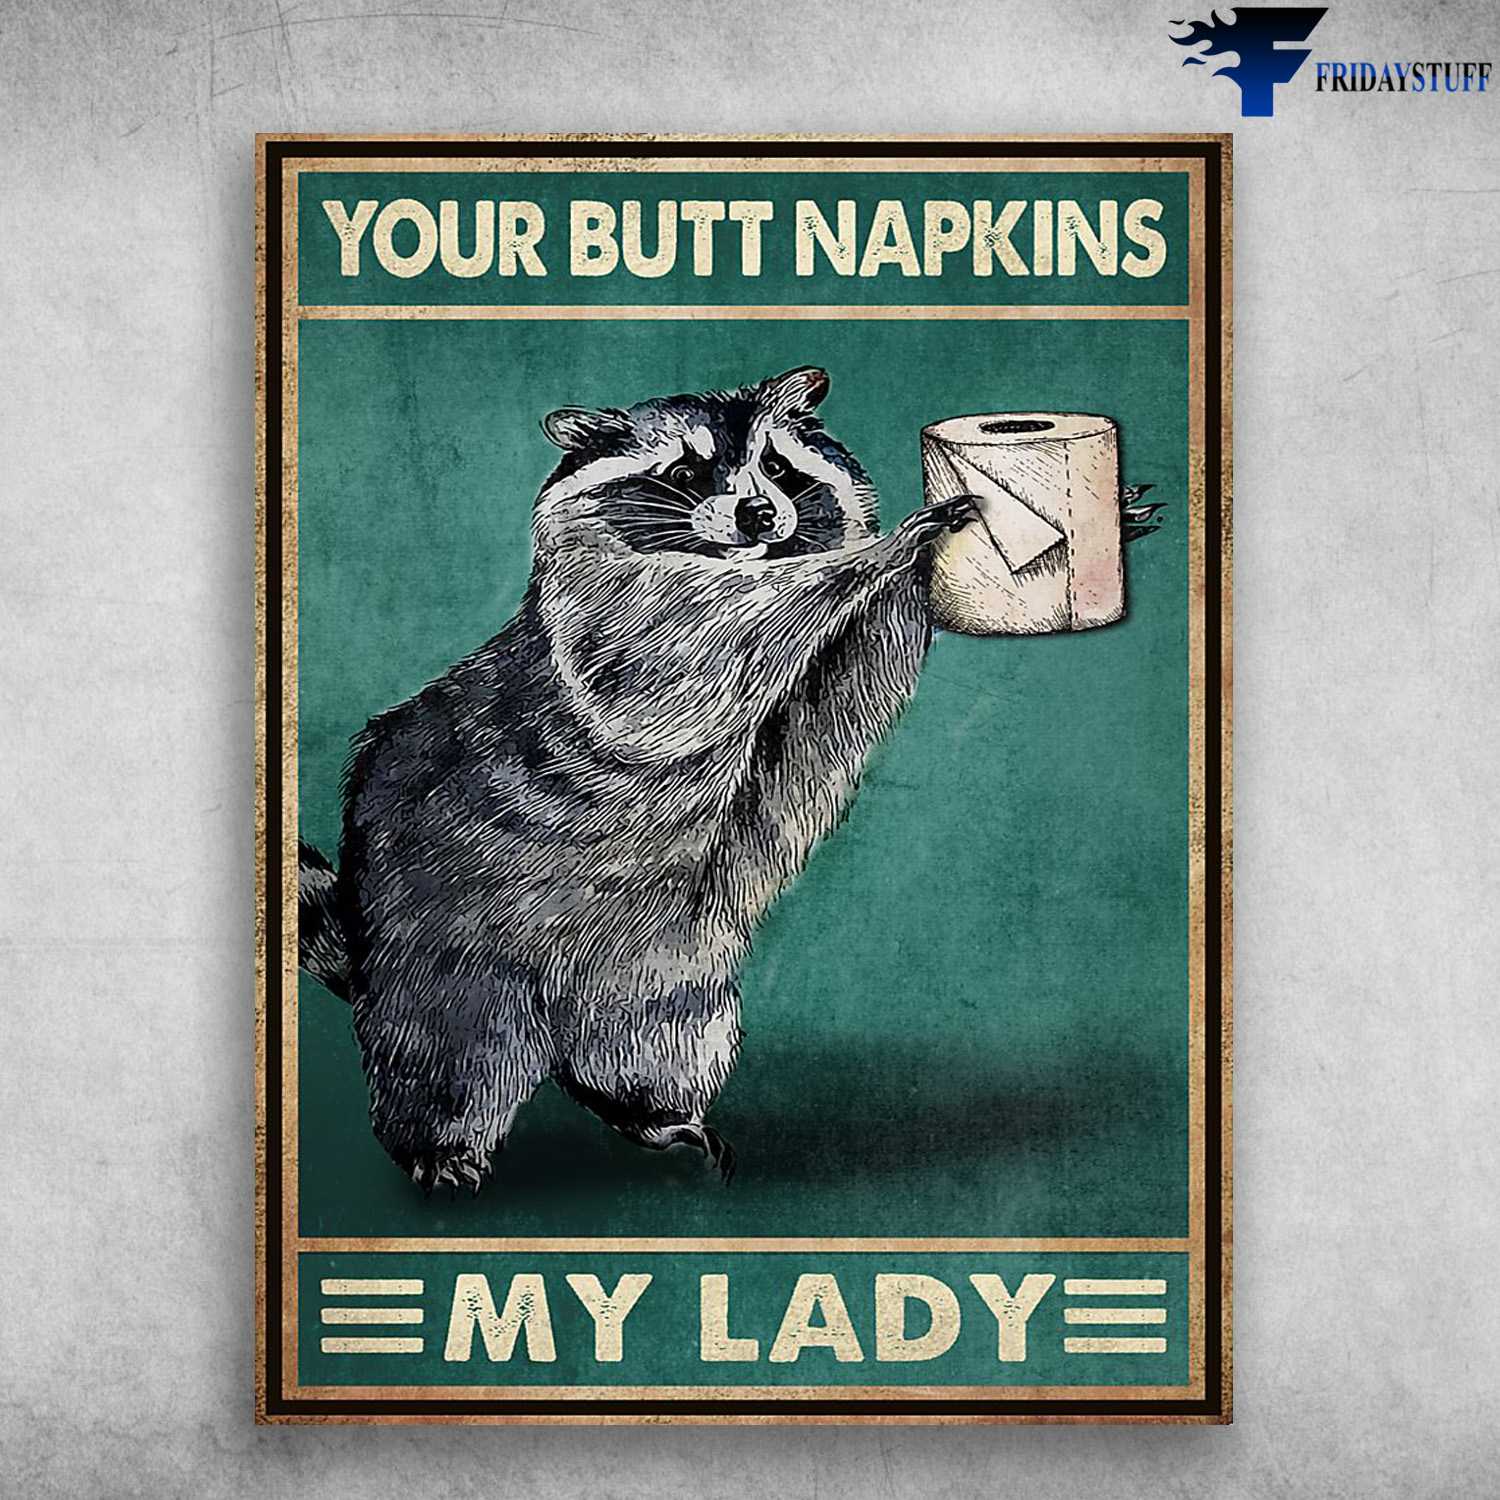 Raccoon Toilet, Toilet Poster - Your Butt Napkins, My Lady